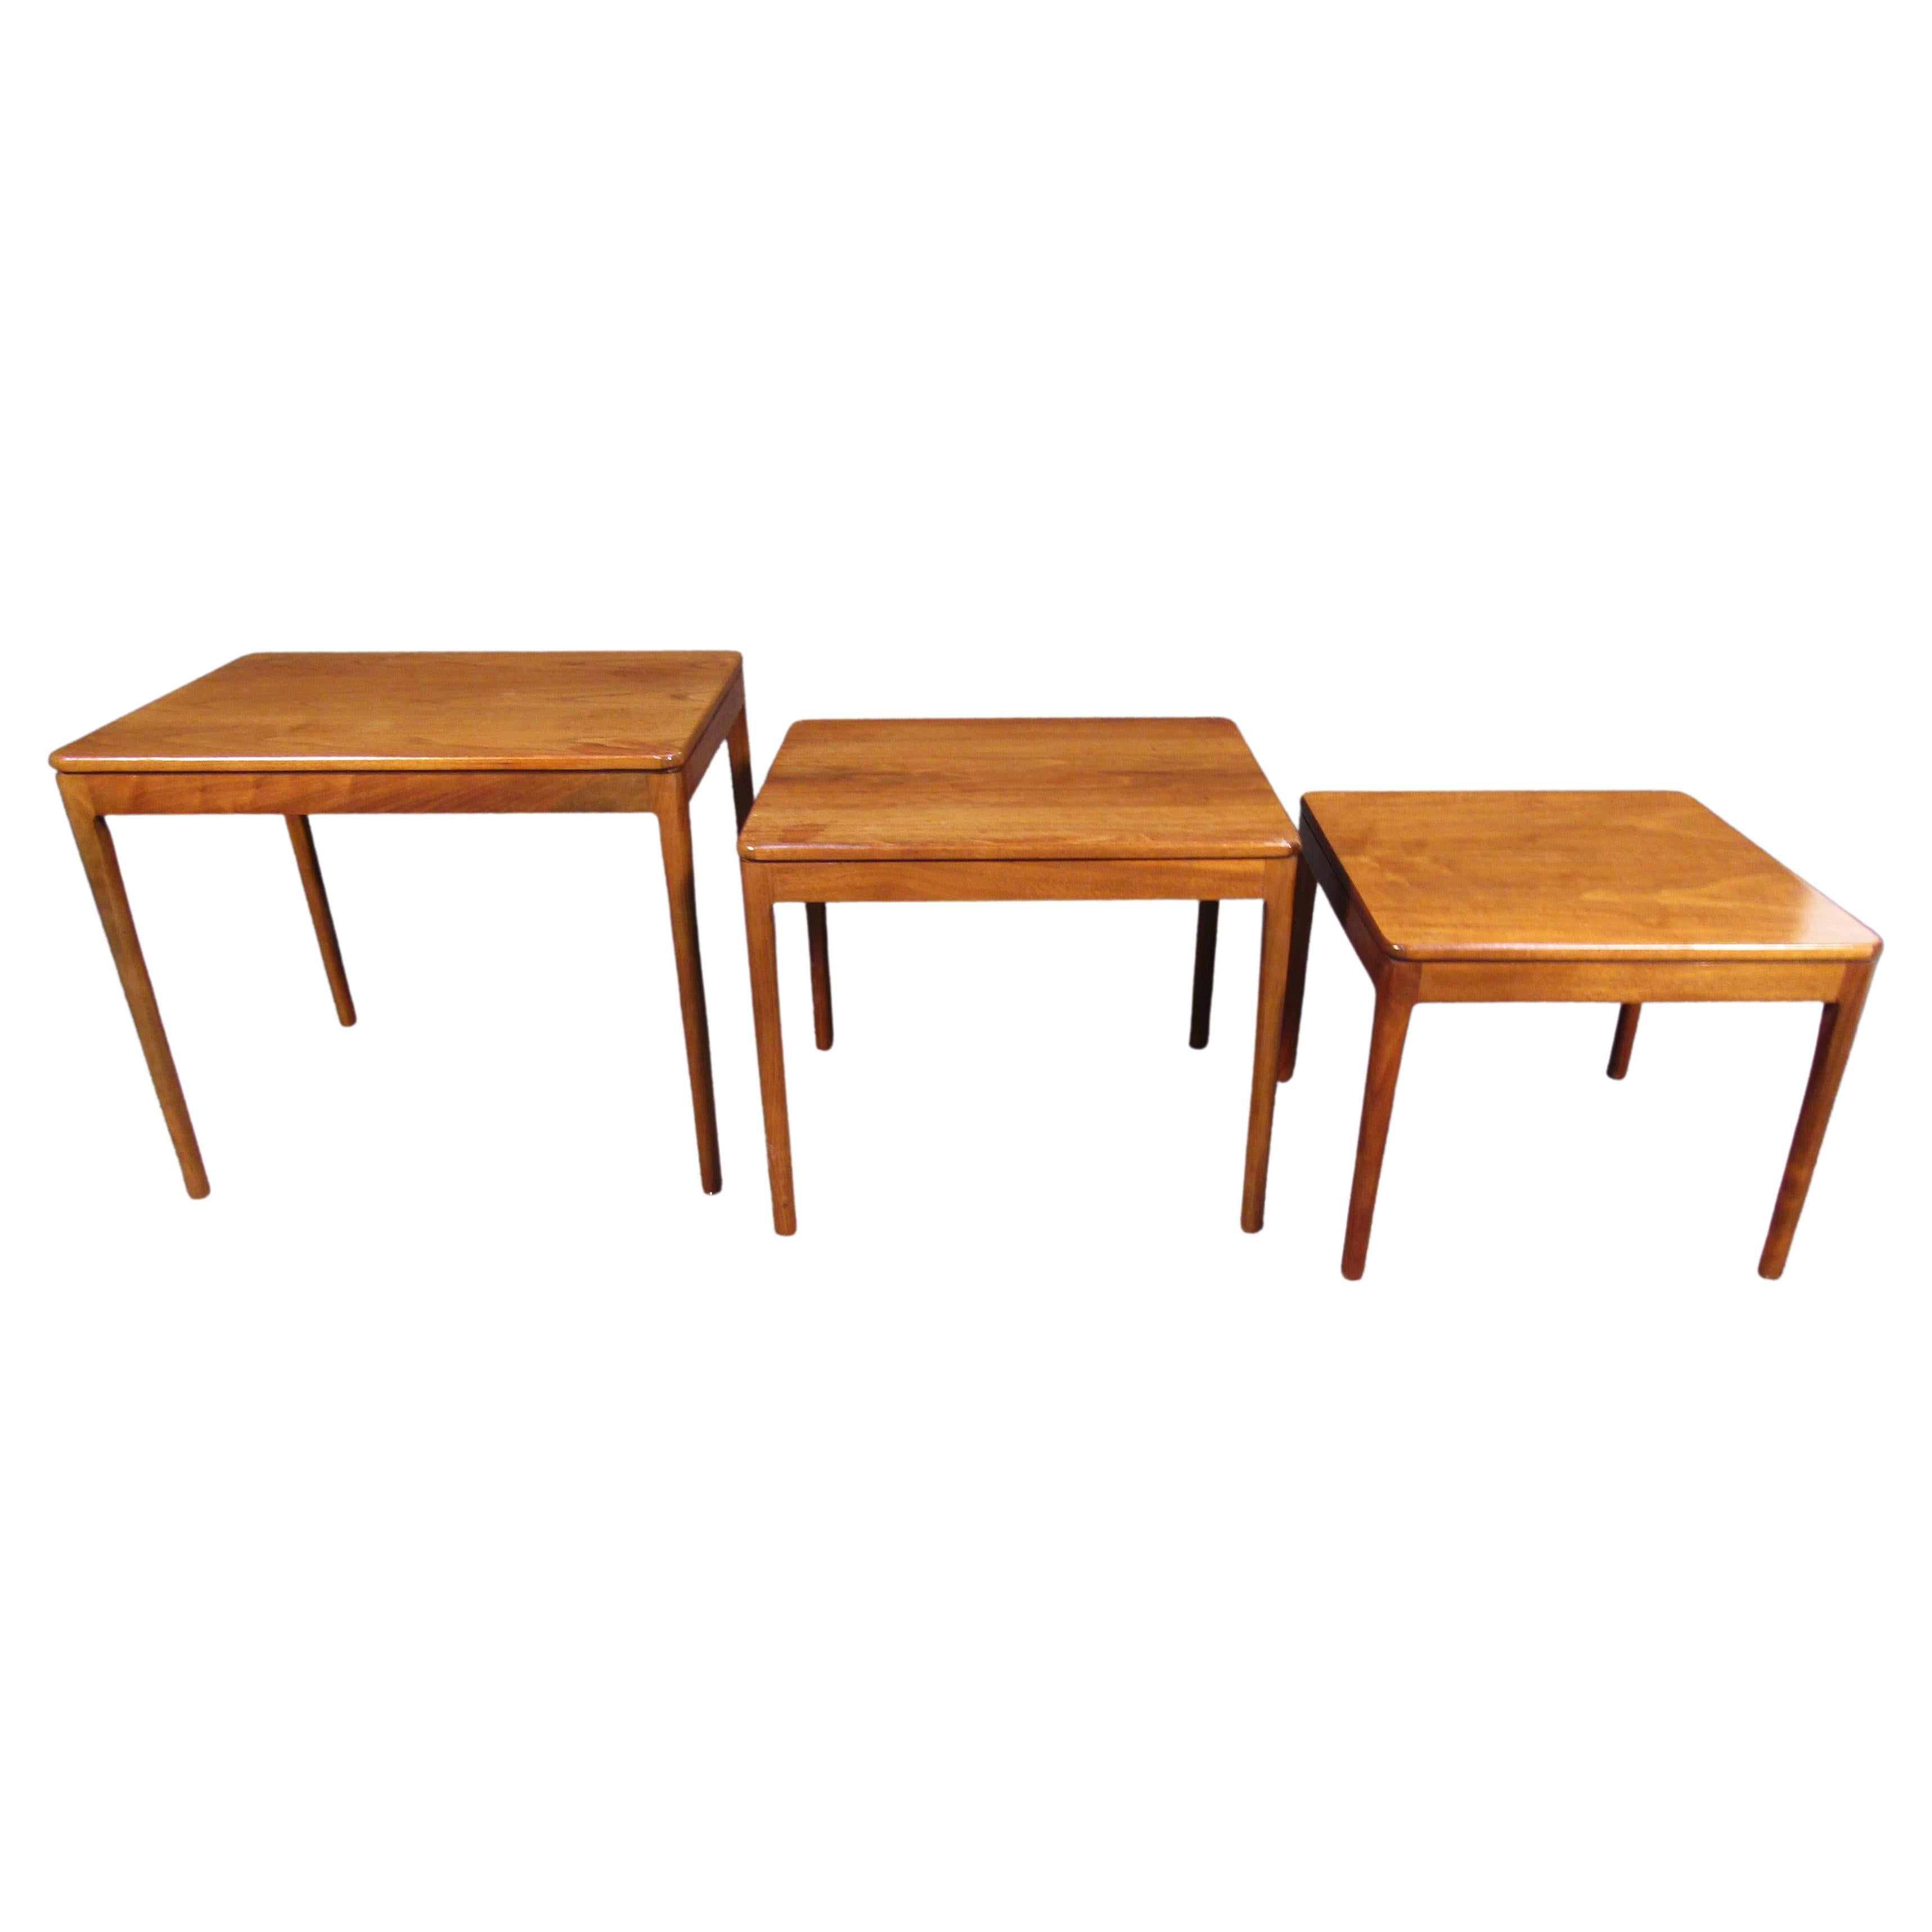 Mid-century American craftsmanship and quality materials make this set of nesting tables by Drexel truly special. Featuring walnut woodgrain and a minimal stacking design. Please confirm item location with seller (NY/NJ).